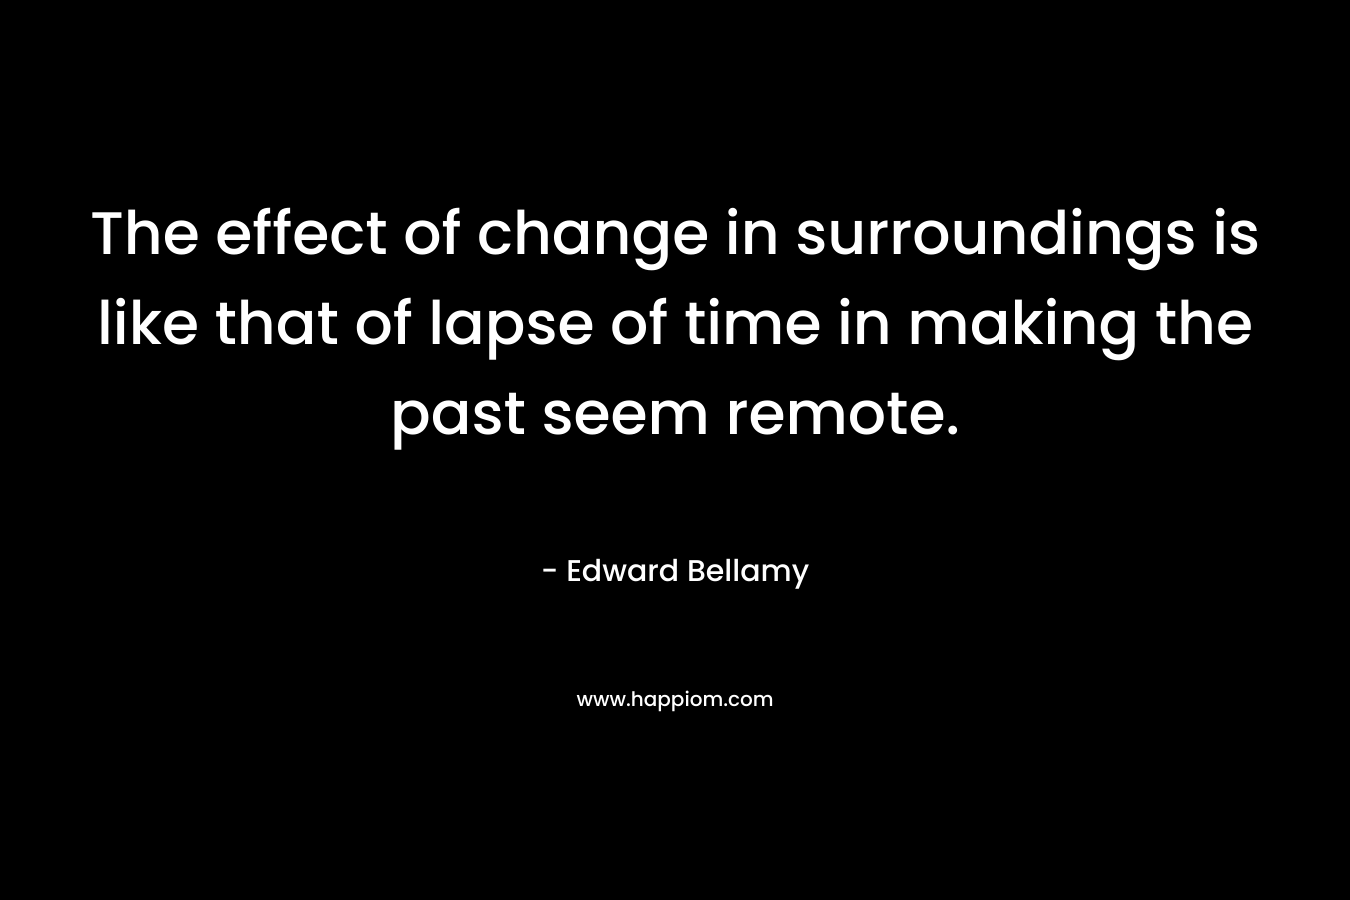 The effect of change in surroundings is like that of lapse of time in making the past seem remote.